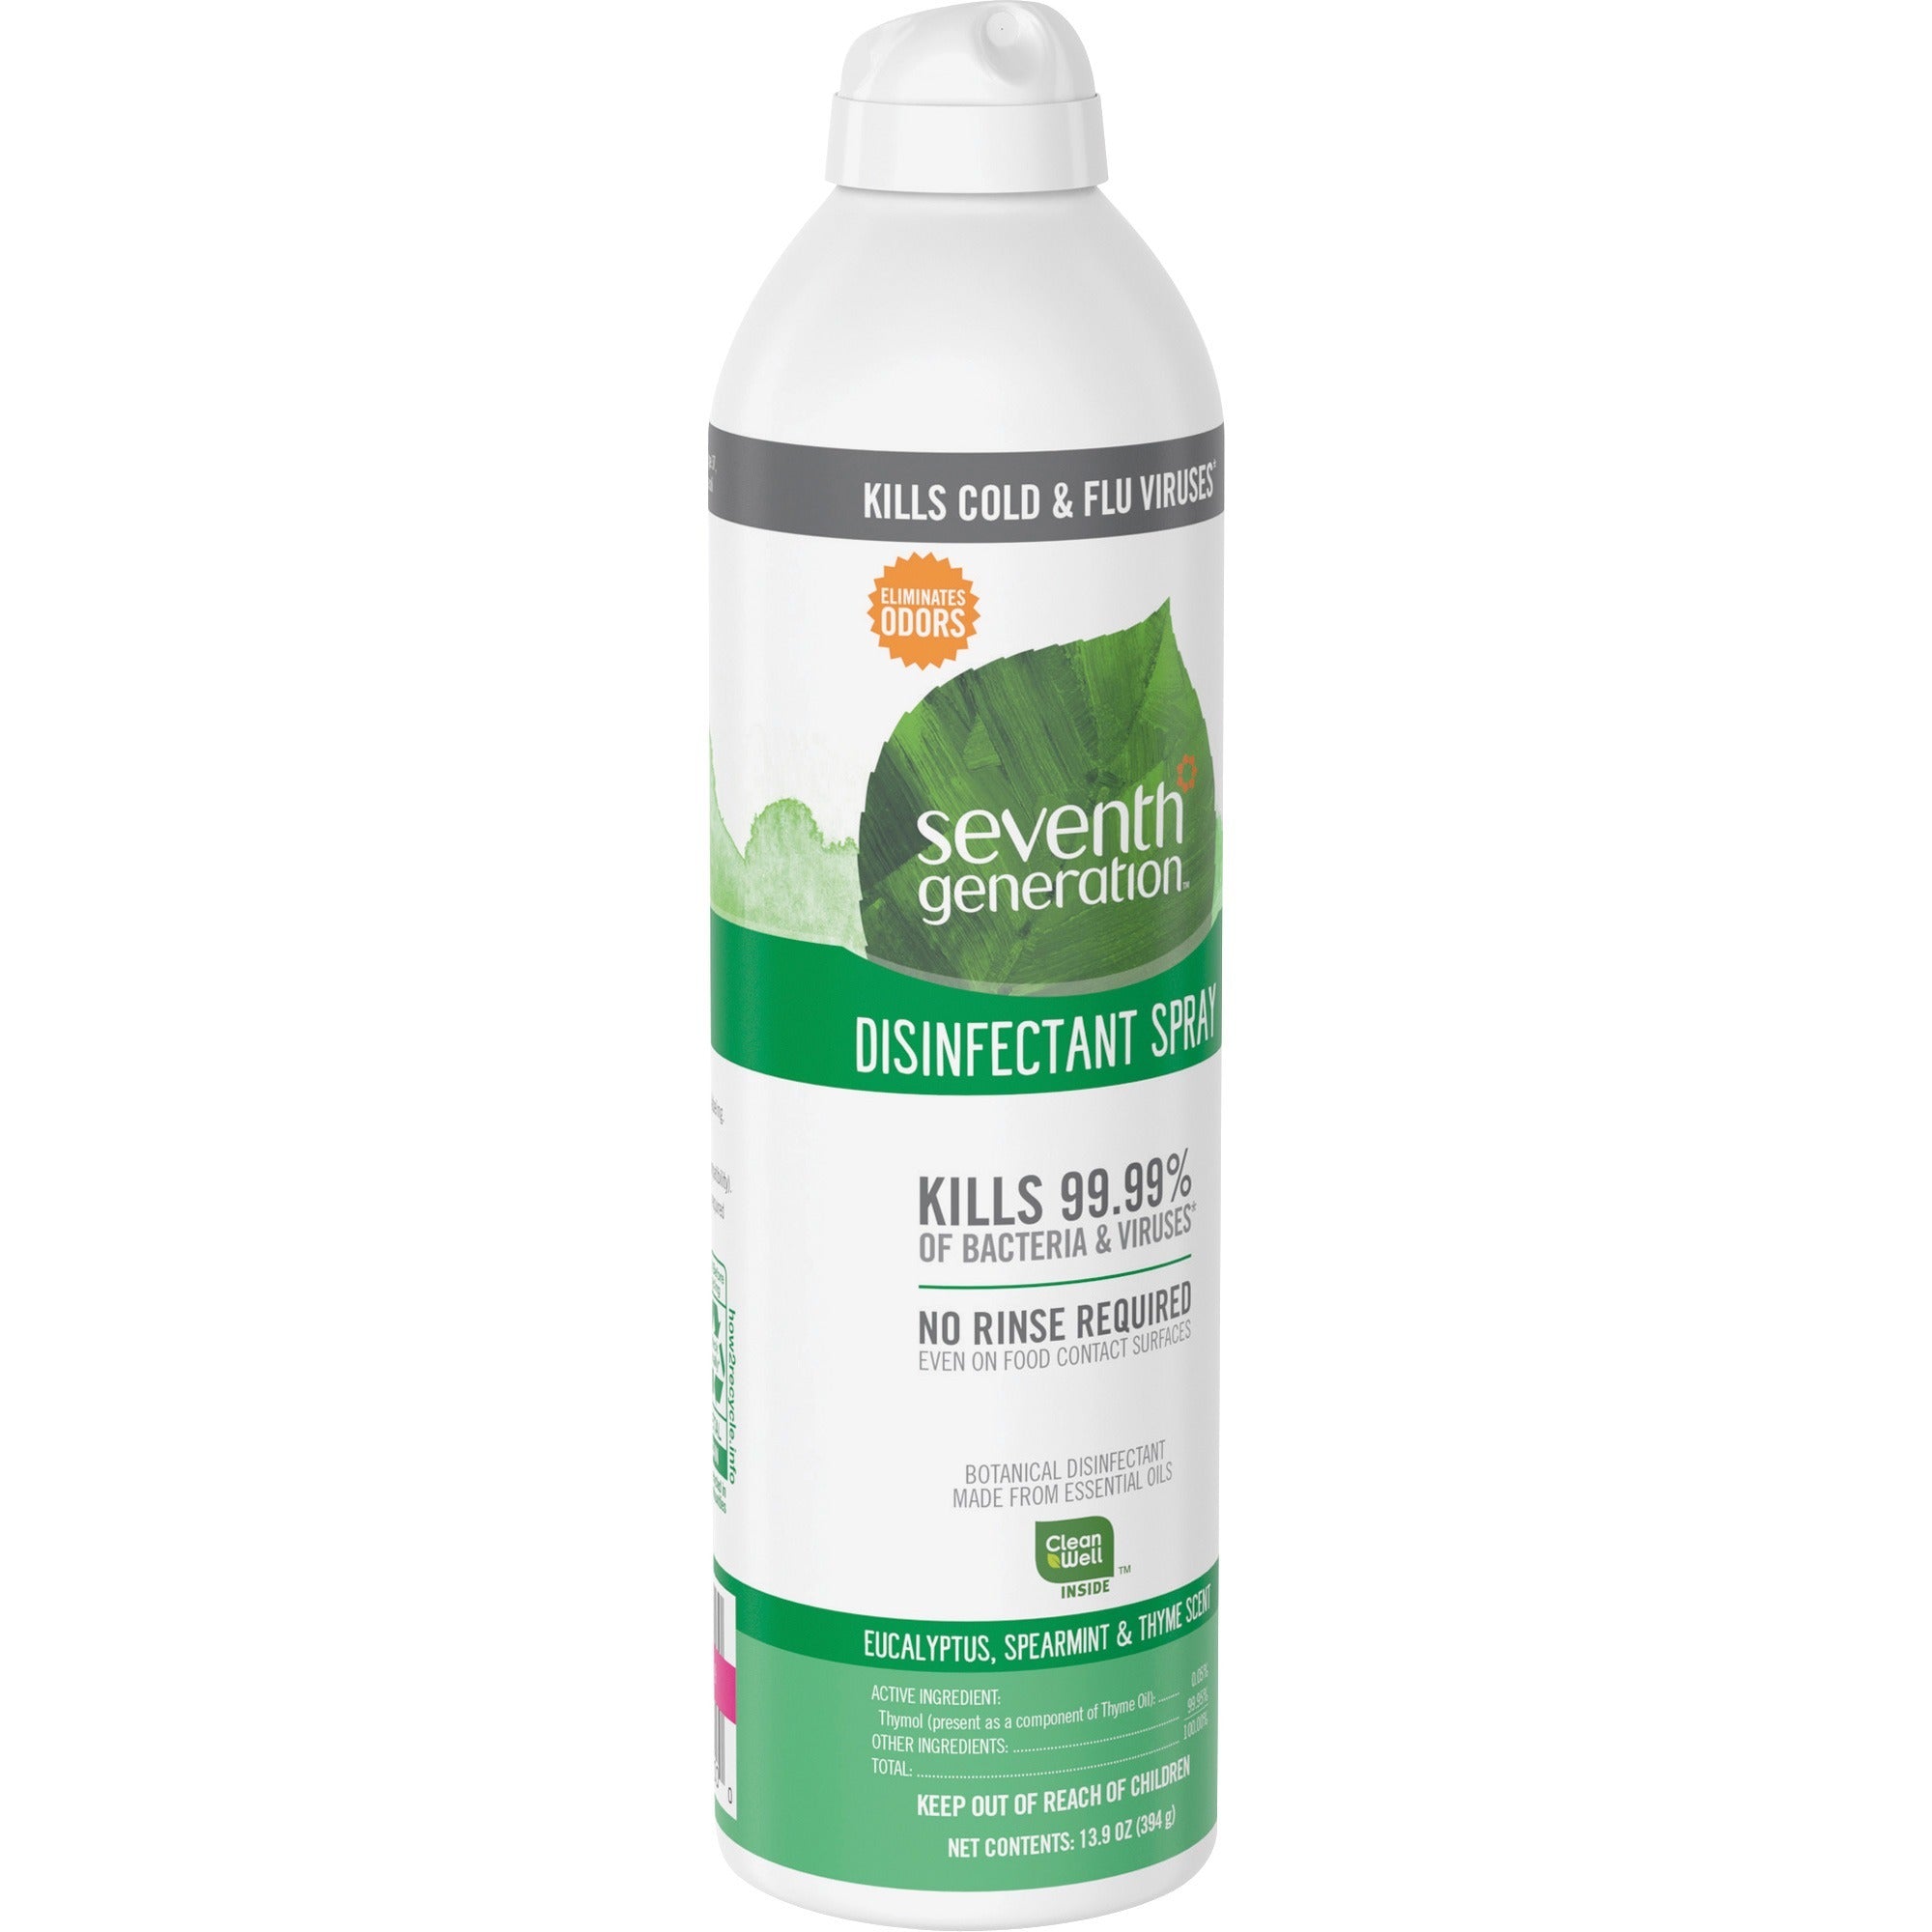 seventh-generation-disinfectant-cleaner-for-day-care-139-fl-oz-04-quart-eucalyptus-spearmint-&-thyme-scent-8-carton-non-flammable-rinse-free-antibacterial-disinfectant-clear_sev22981ct - 3